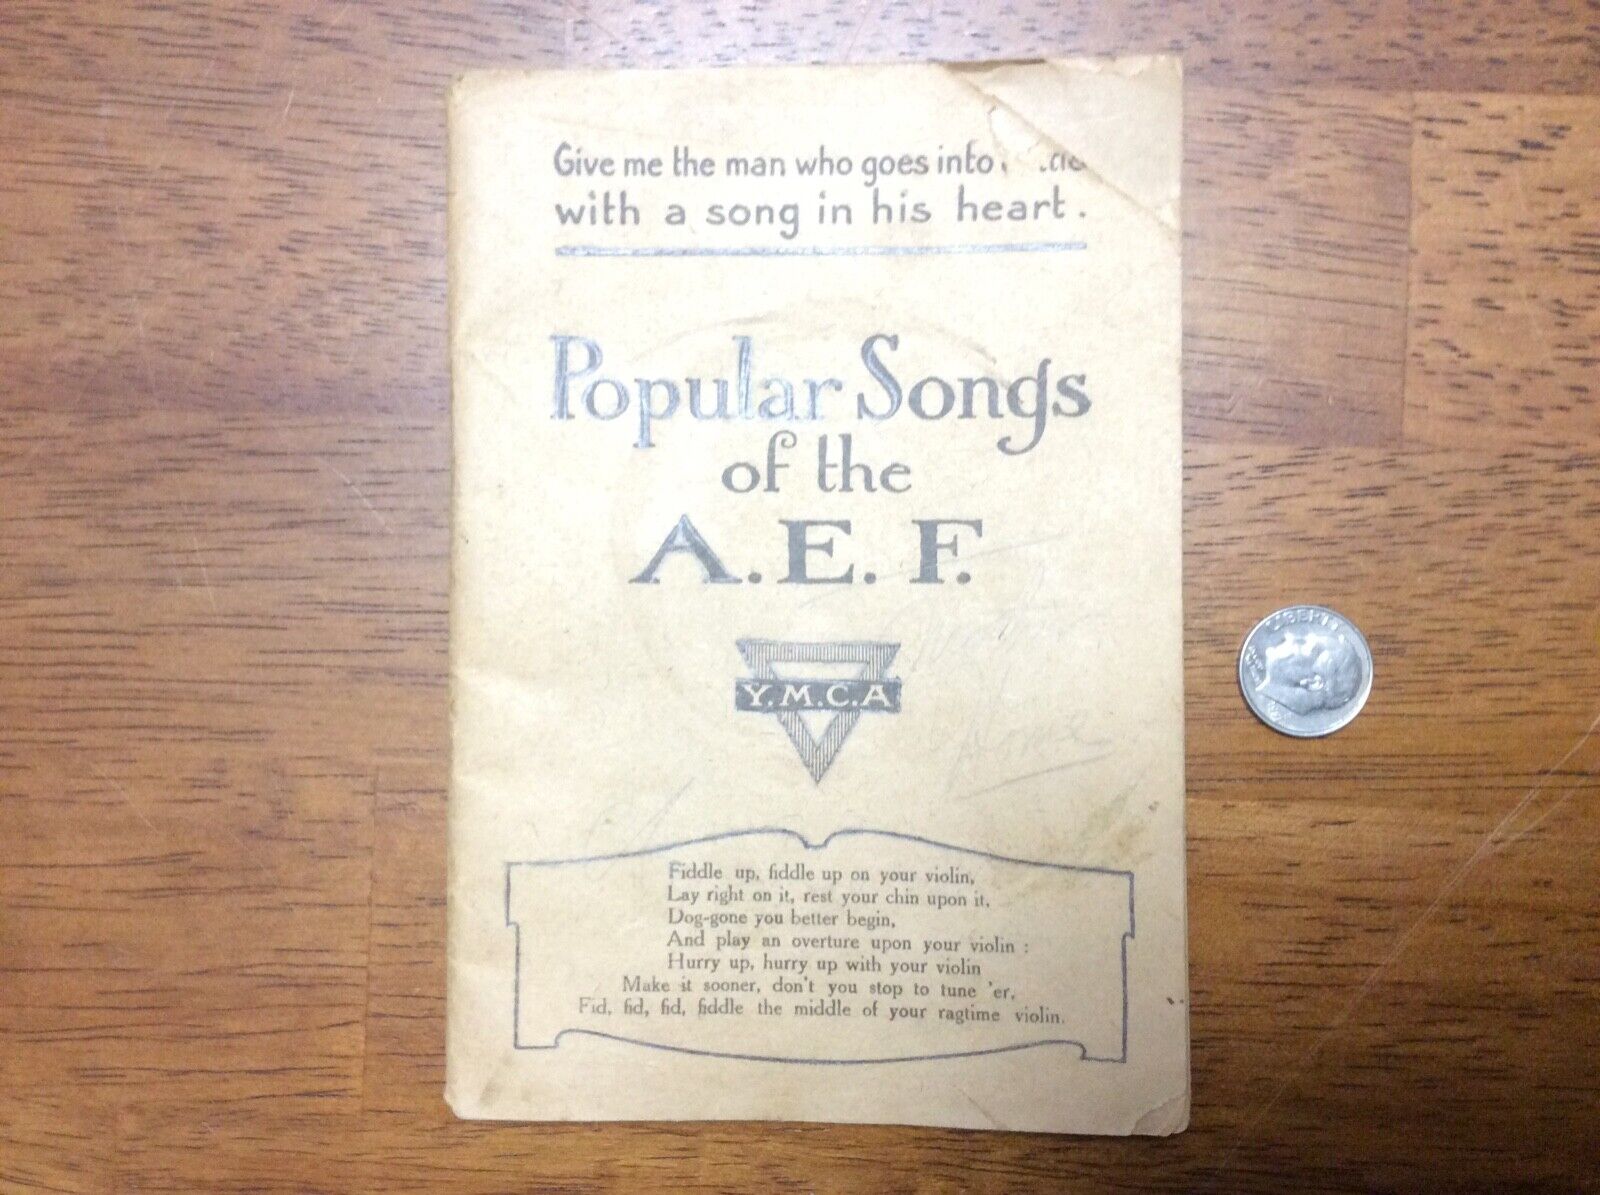 WWI 1918 Paris Popular Songs Of The A.E.F. YMCA Book Booklet Expeditionary Force